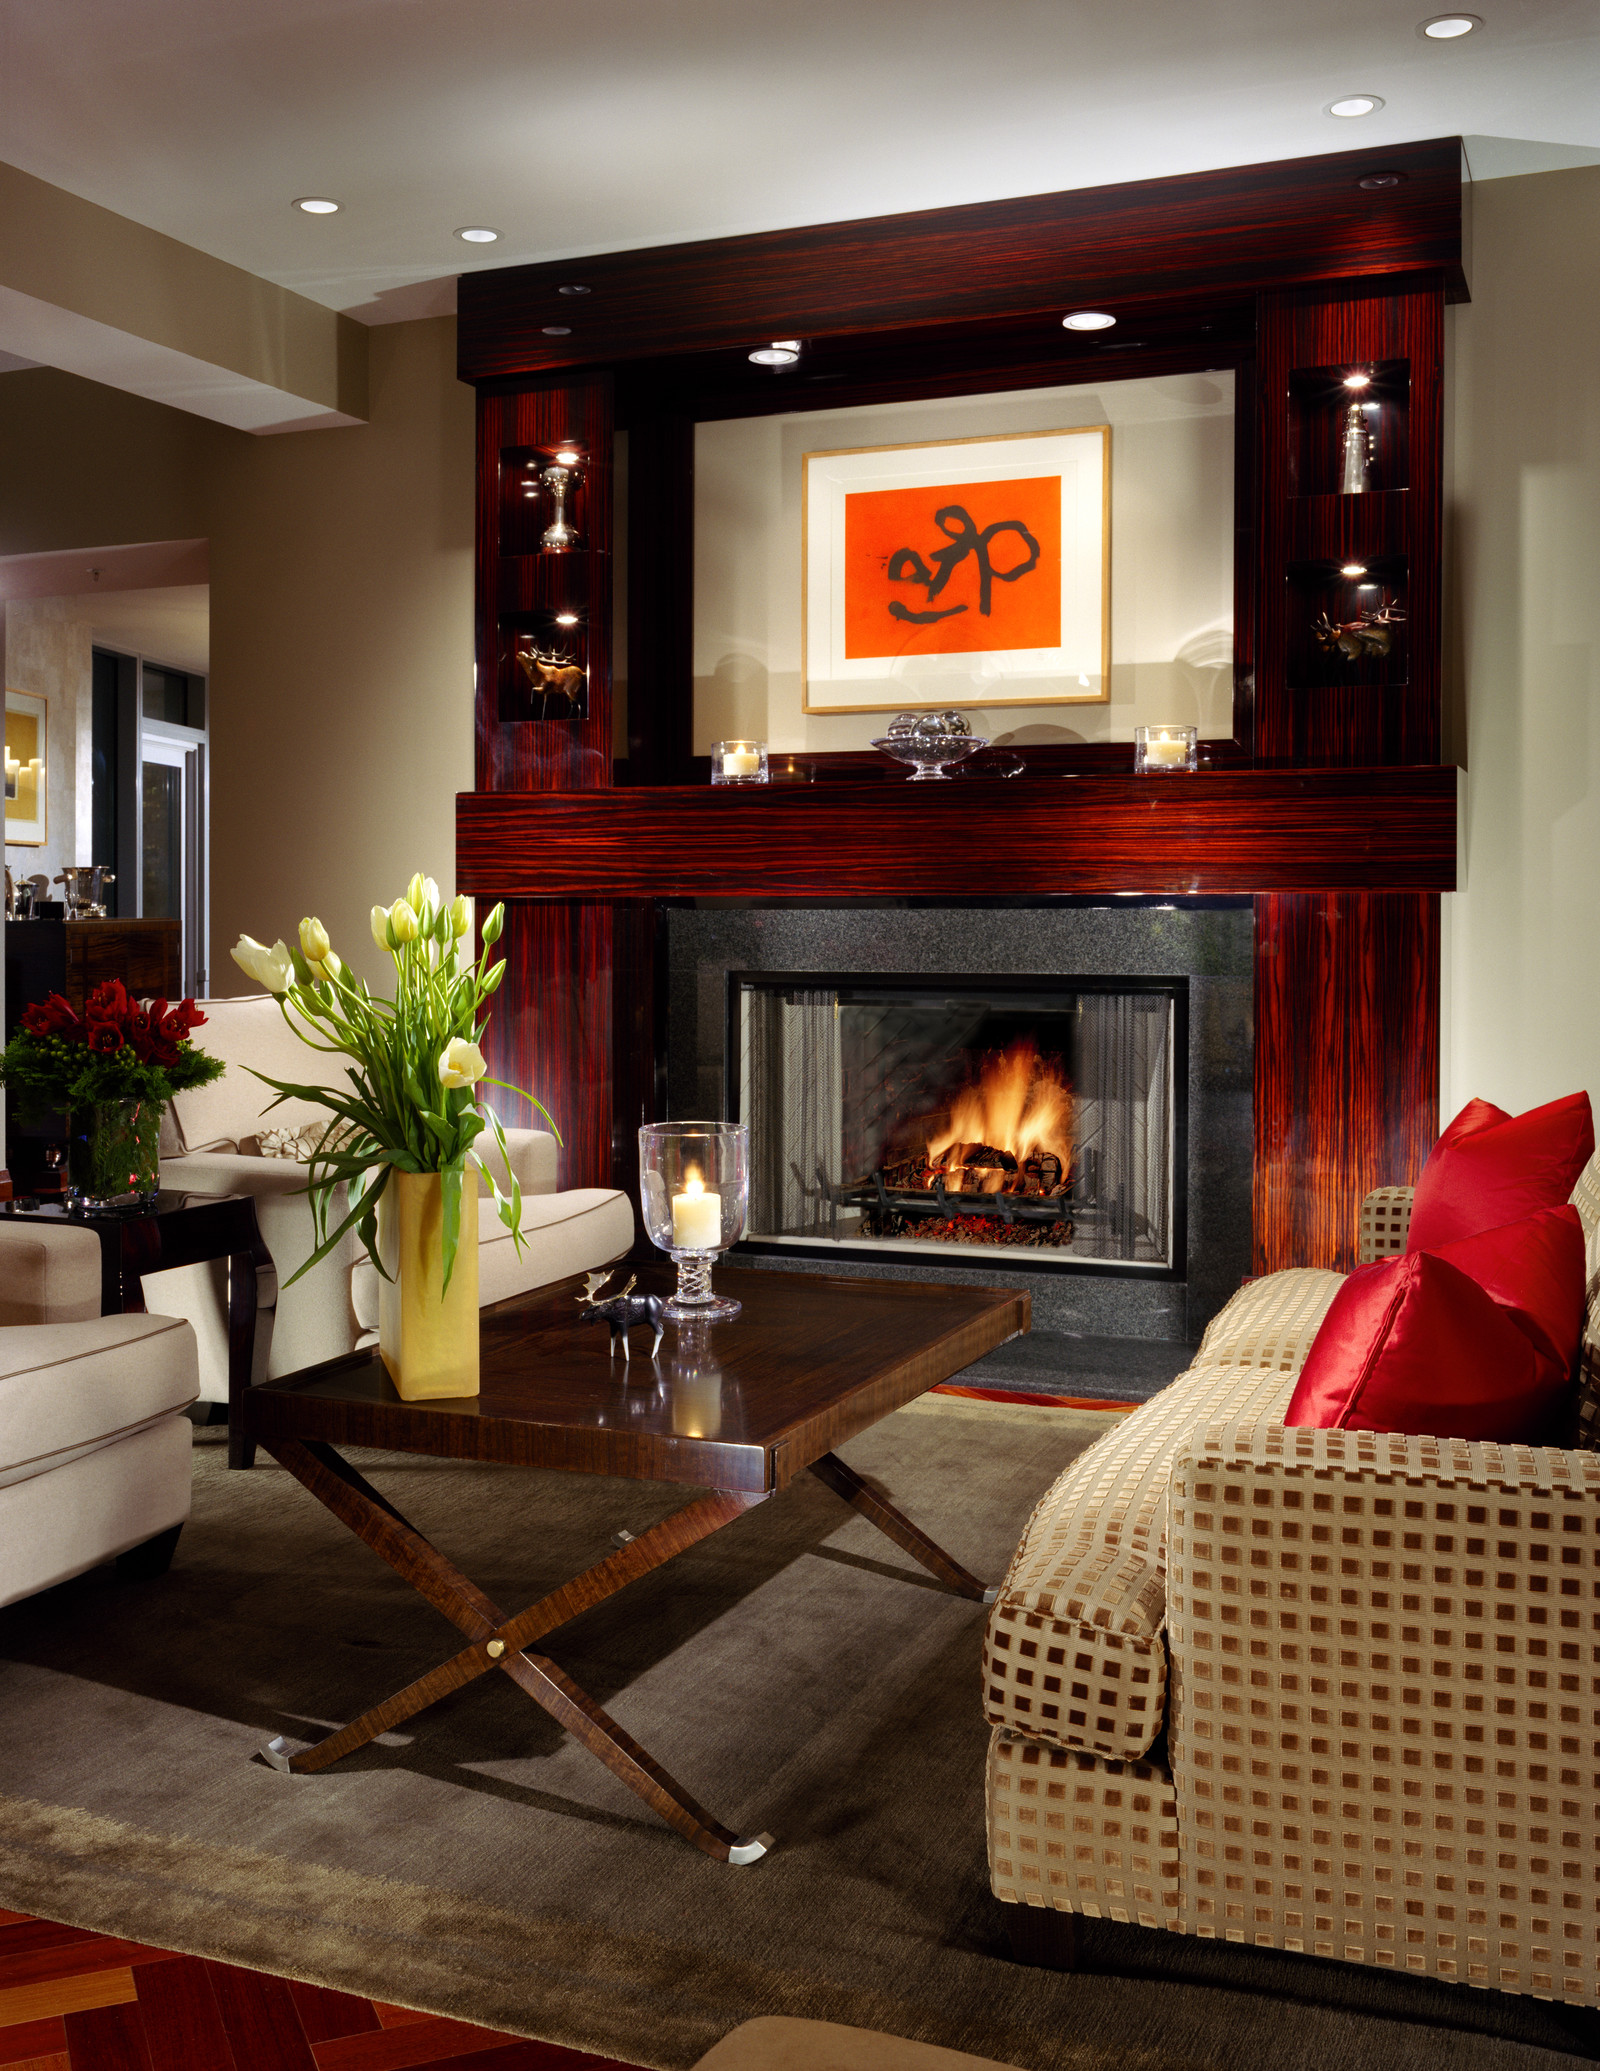 This beautiful custom mantel highlights this contemporary home